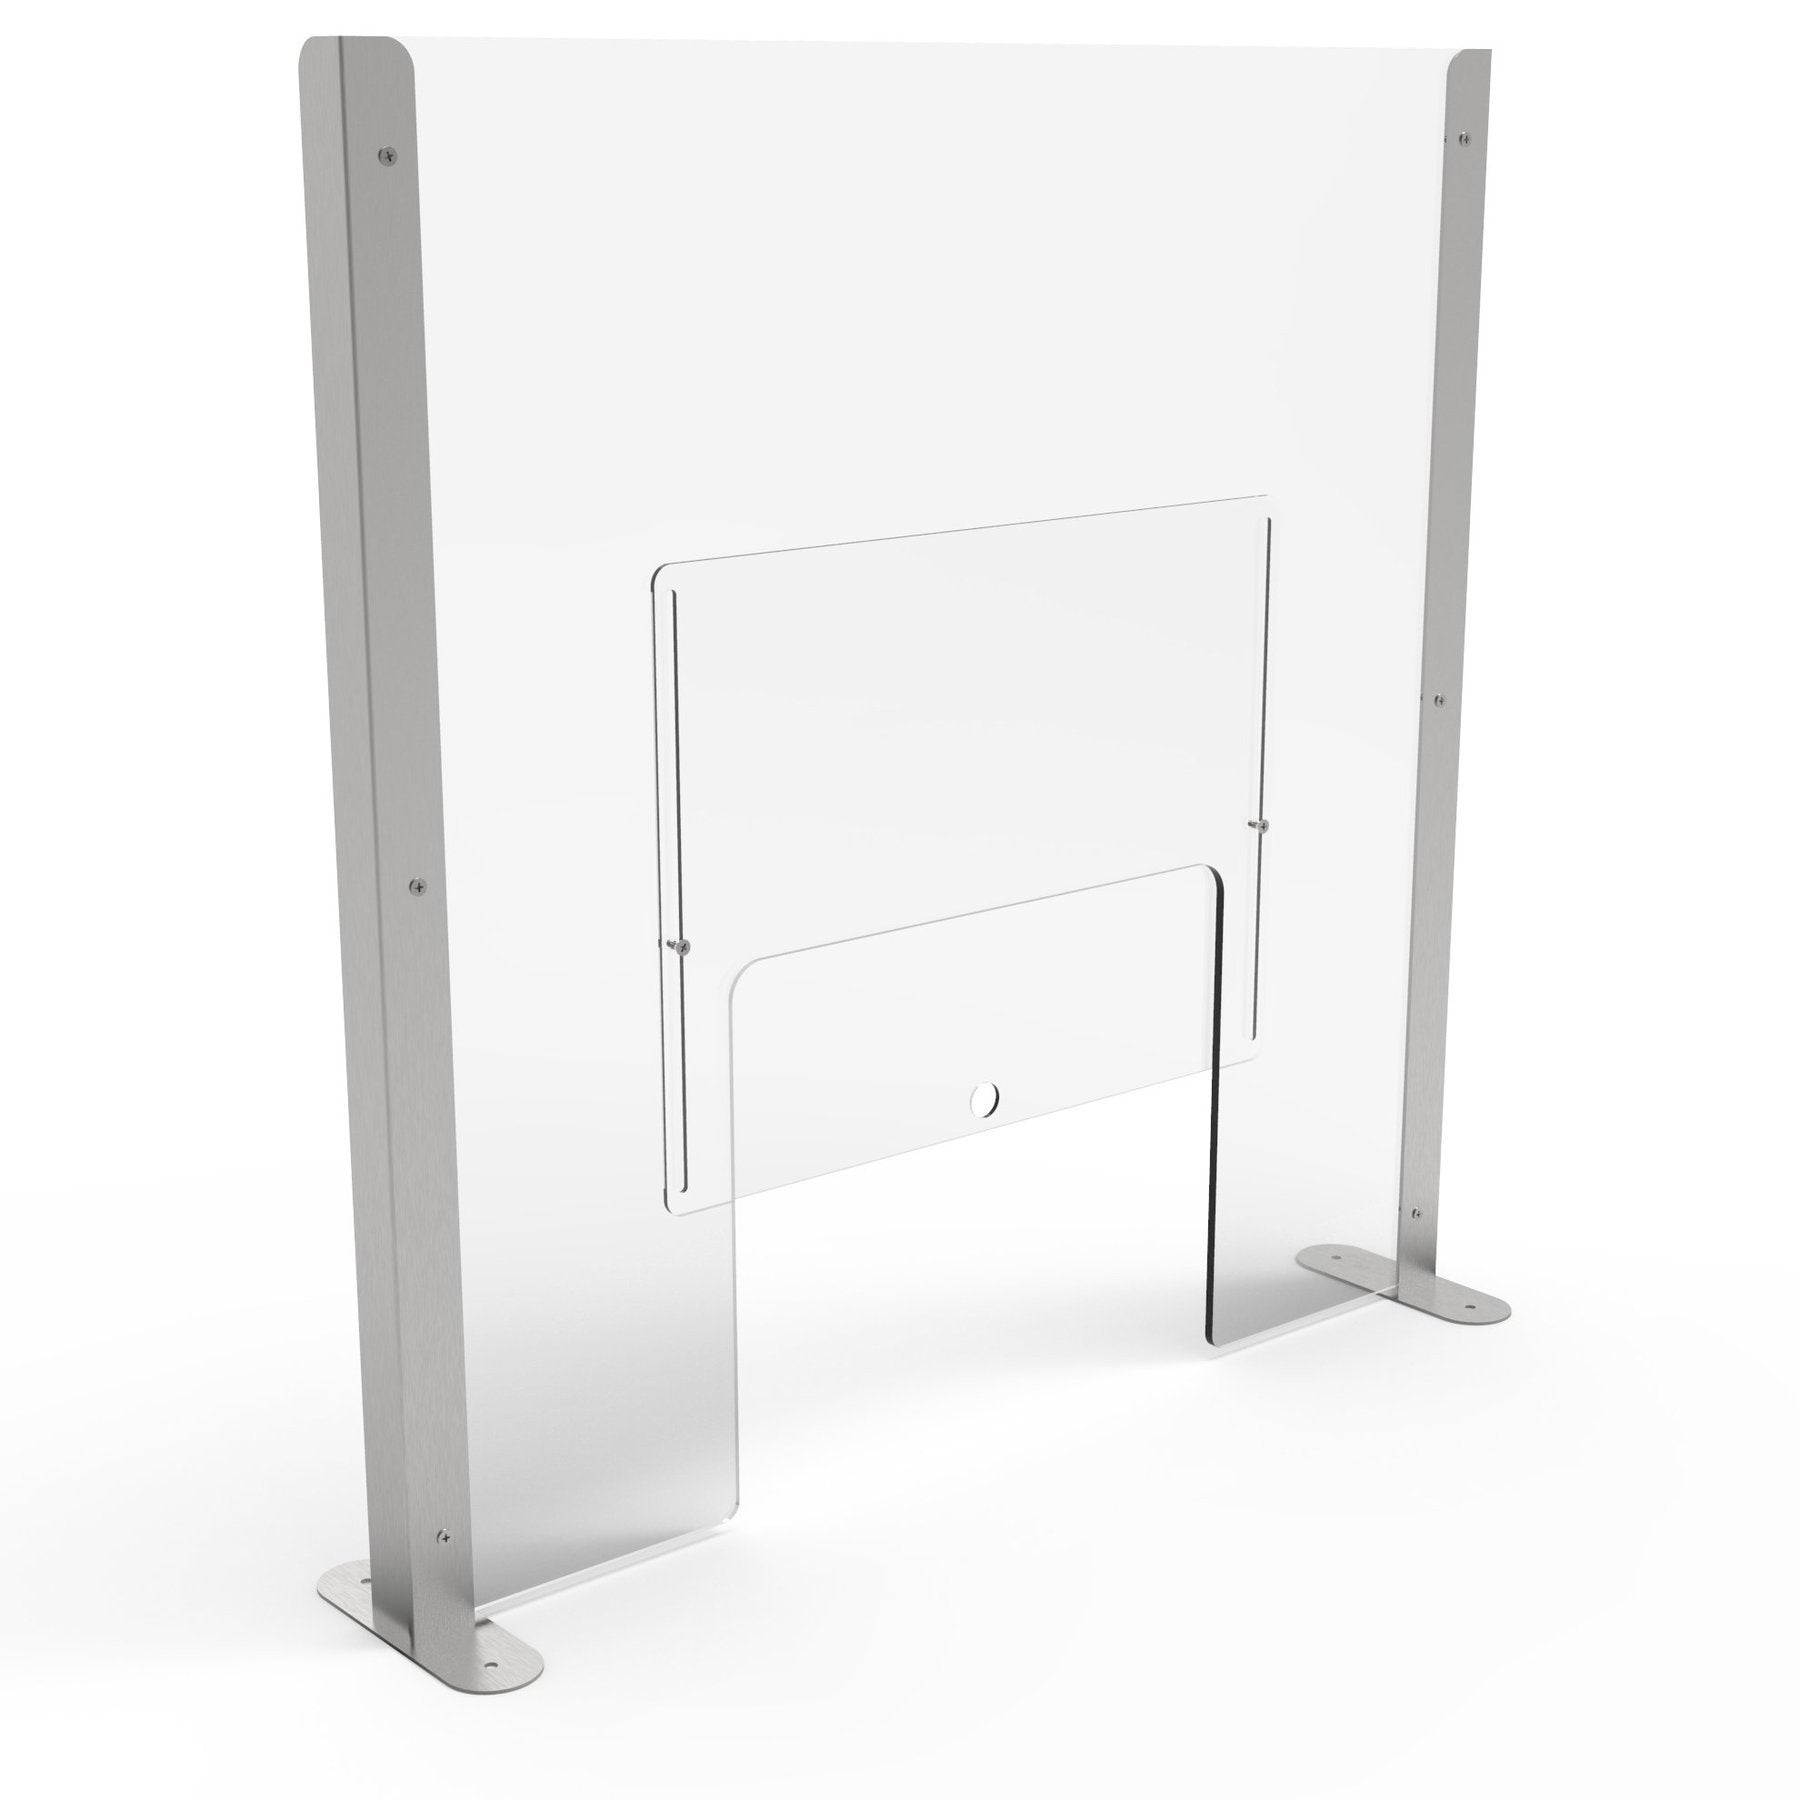 Pro Sneeze Guard with Acrylic Screen & Stainless-Steel Legs - Displaypro